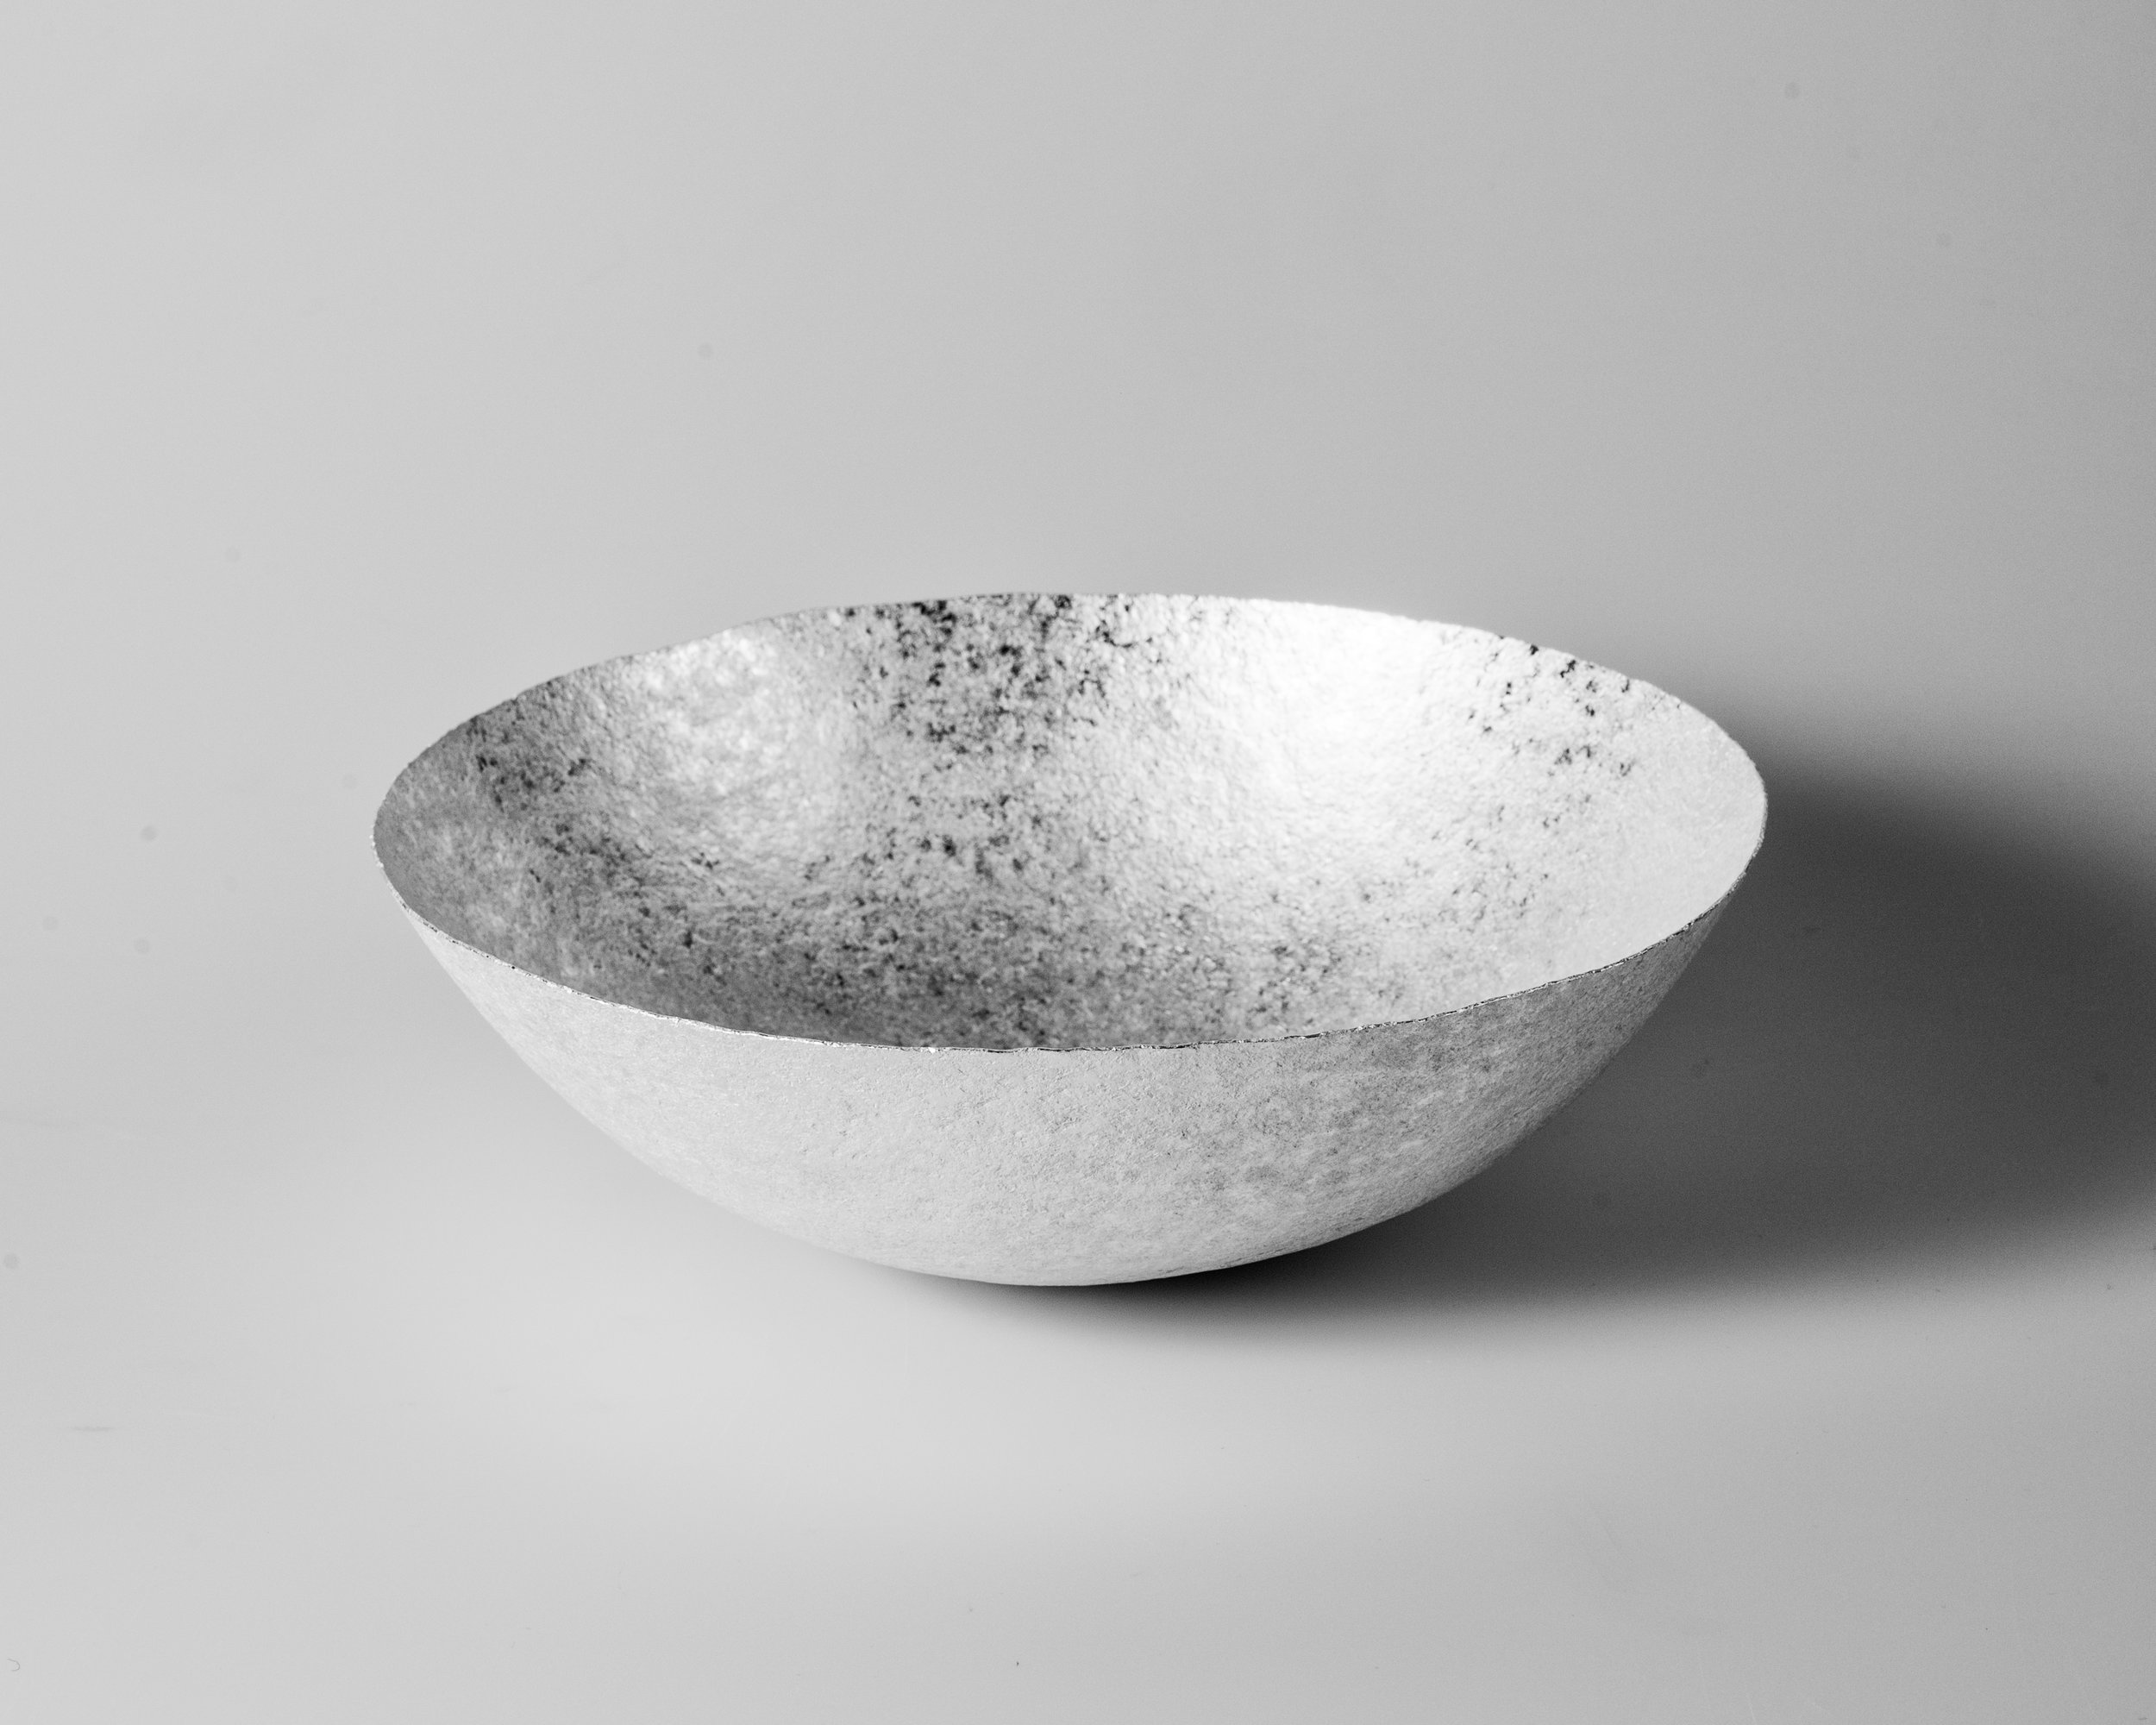   The importance of water V (Bowl), 2018  | Forged silver. 925 S. 662 g. H. 8.5 x W. 26 cm.  Photo credit: Christian Tviberg 